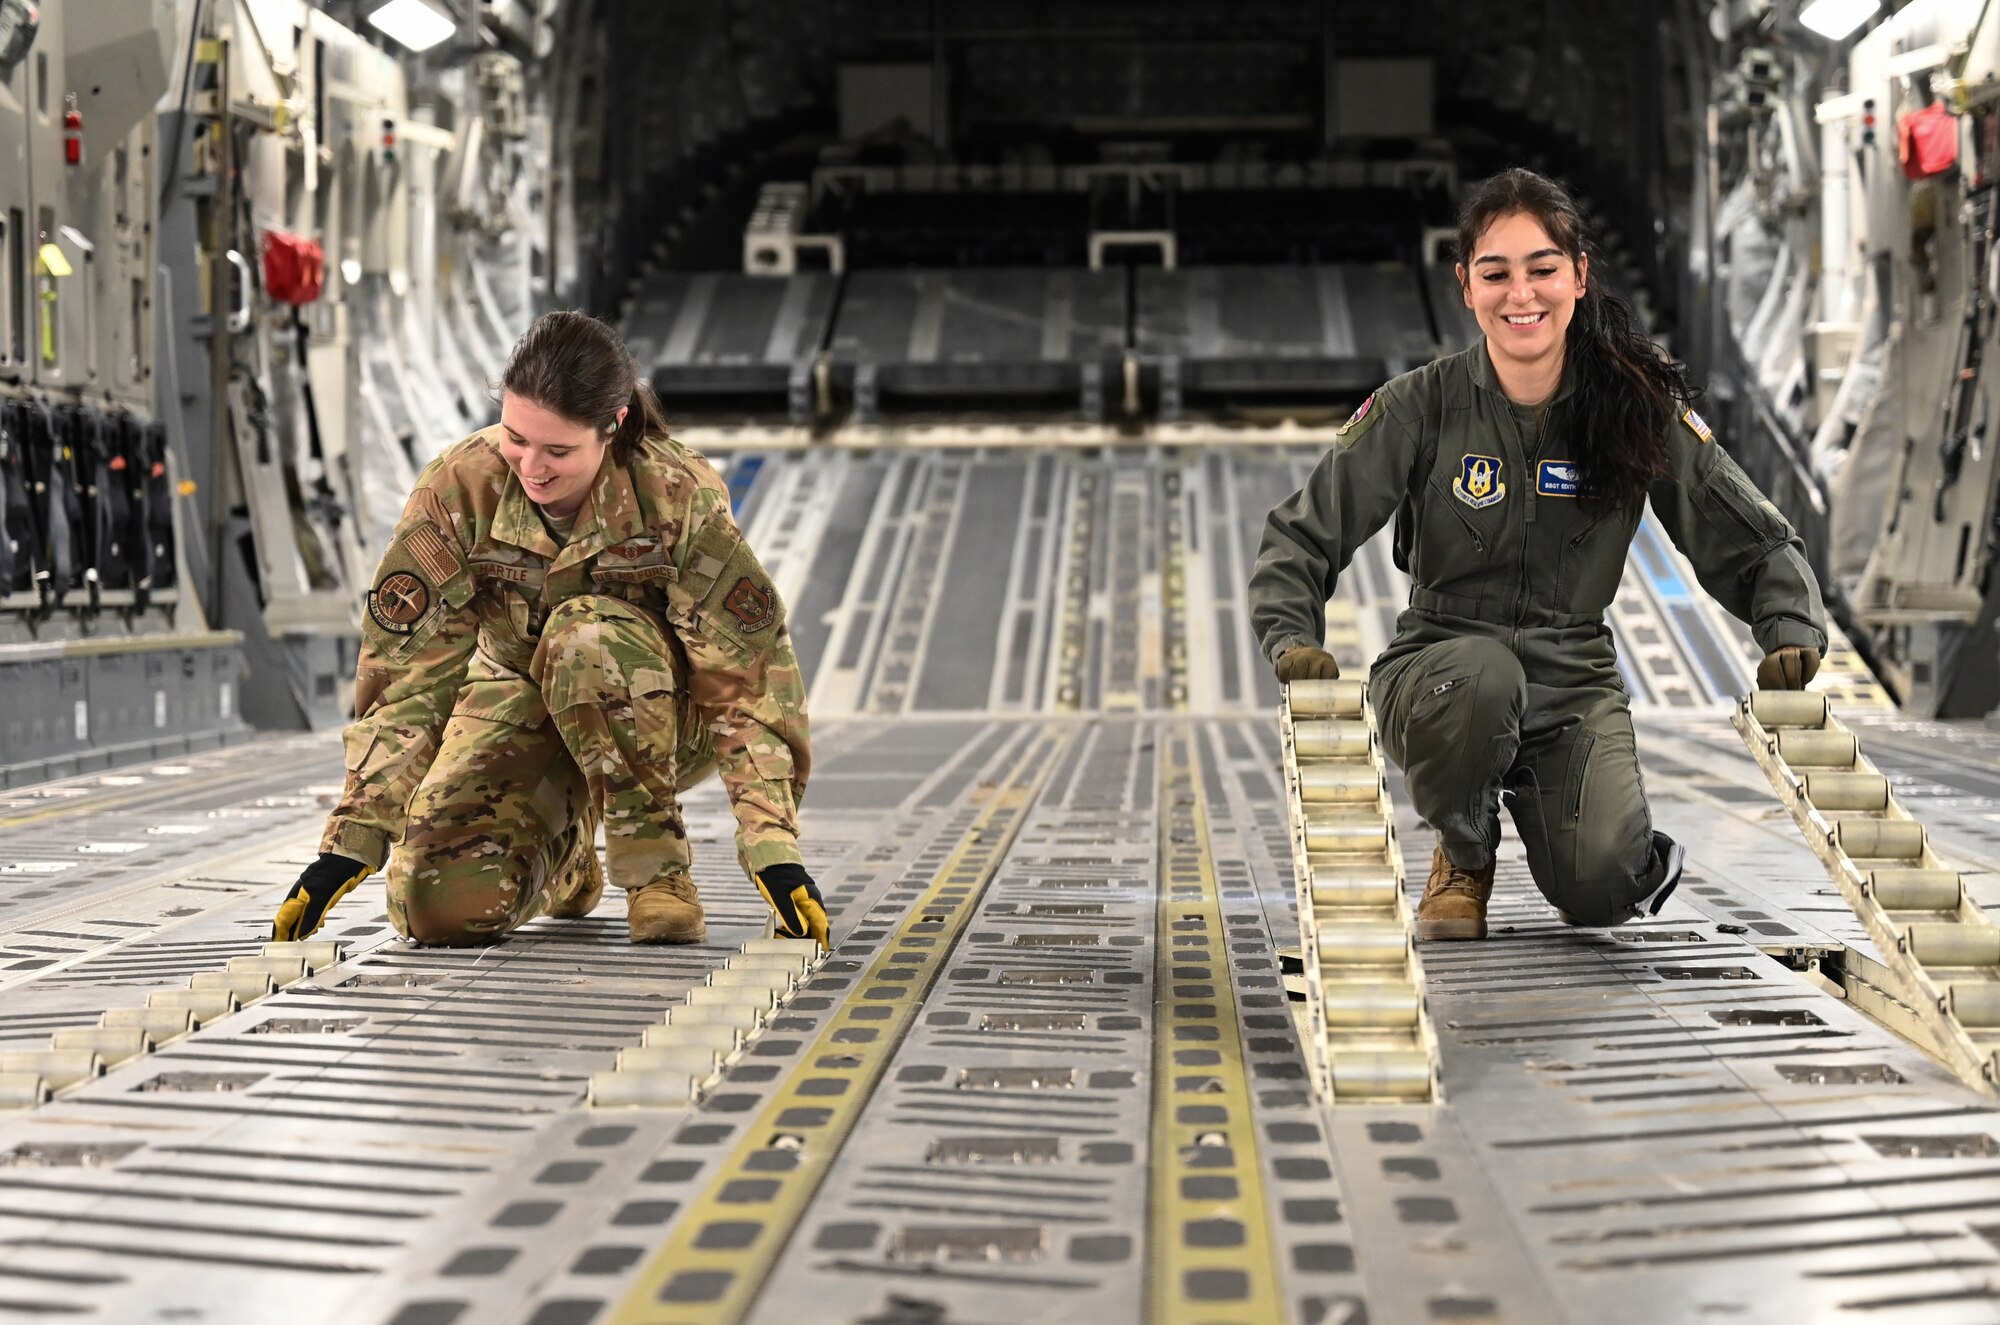 Two female loadmasters in flight suits flip rollers on the floor of the inside of a C-17 Globemaster.